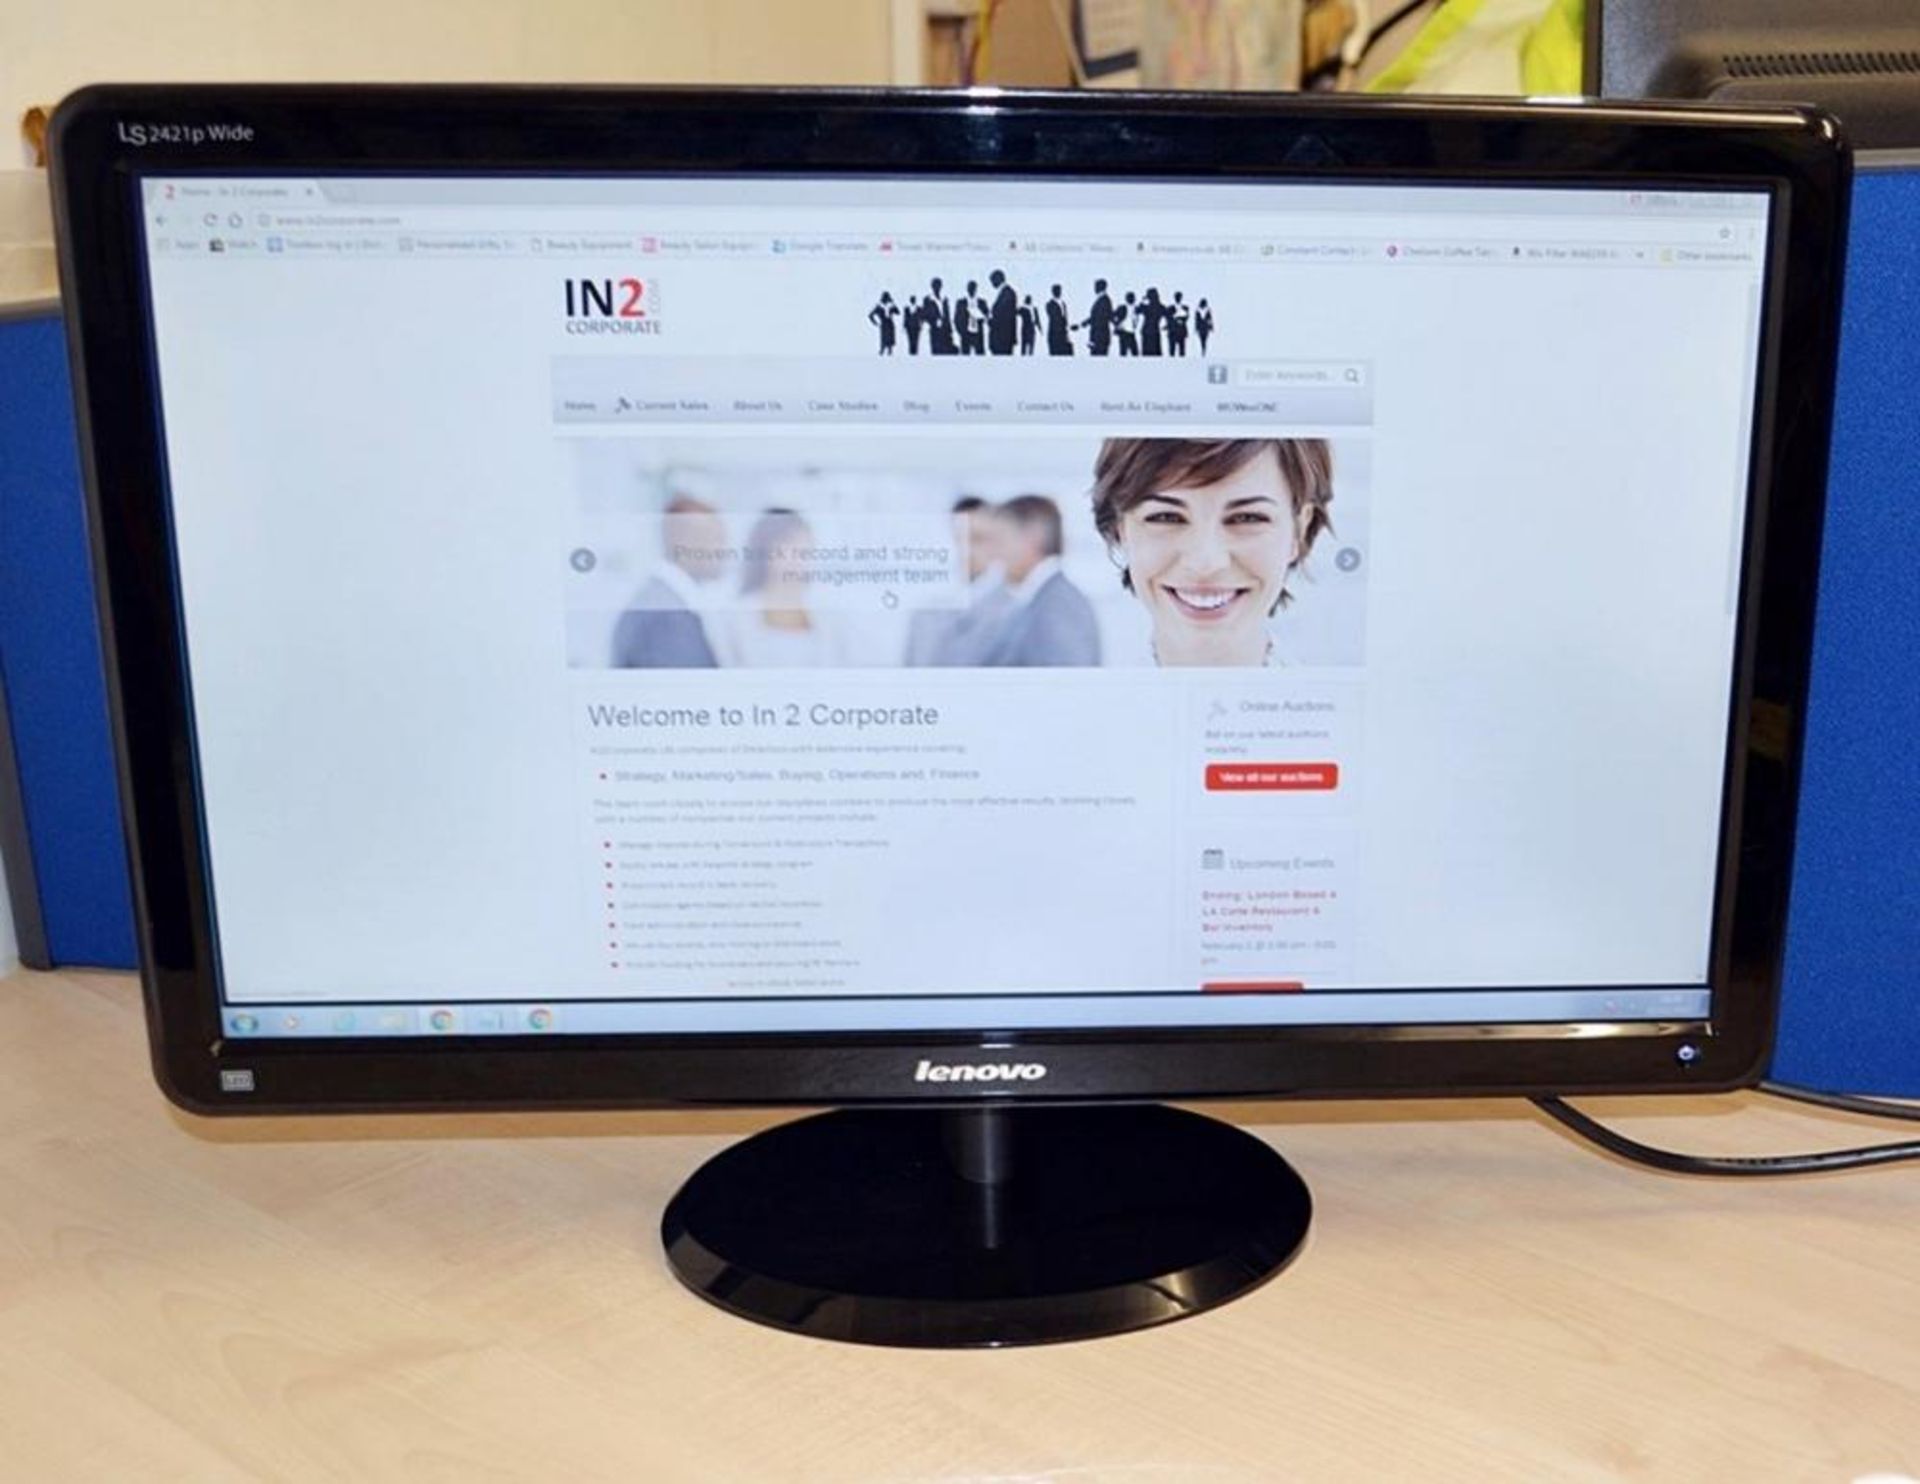 1 x Lenovo LS2421p Wide 23.6" Full HD LED TFT Monitor (Model: 4015-LS1) - Recently Taken From A Work - Image 4 of 14